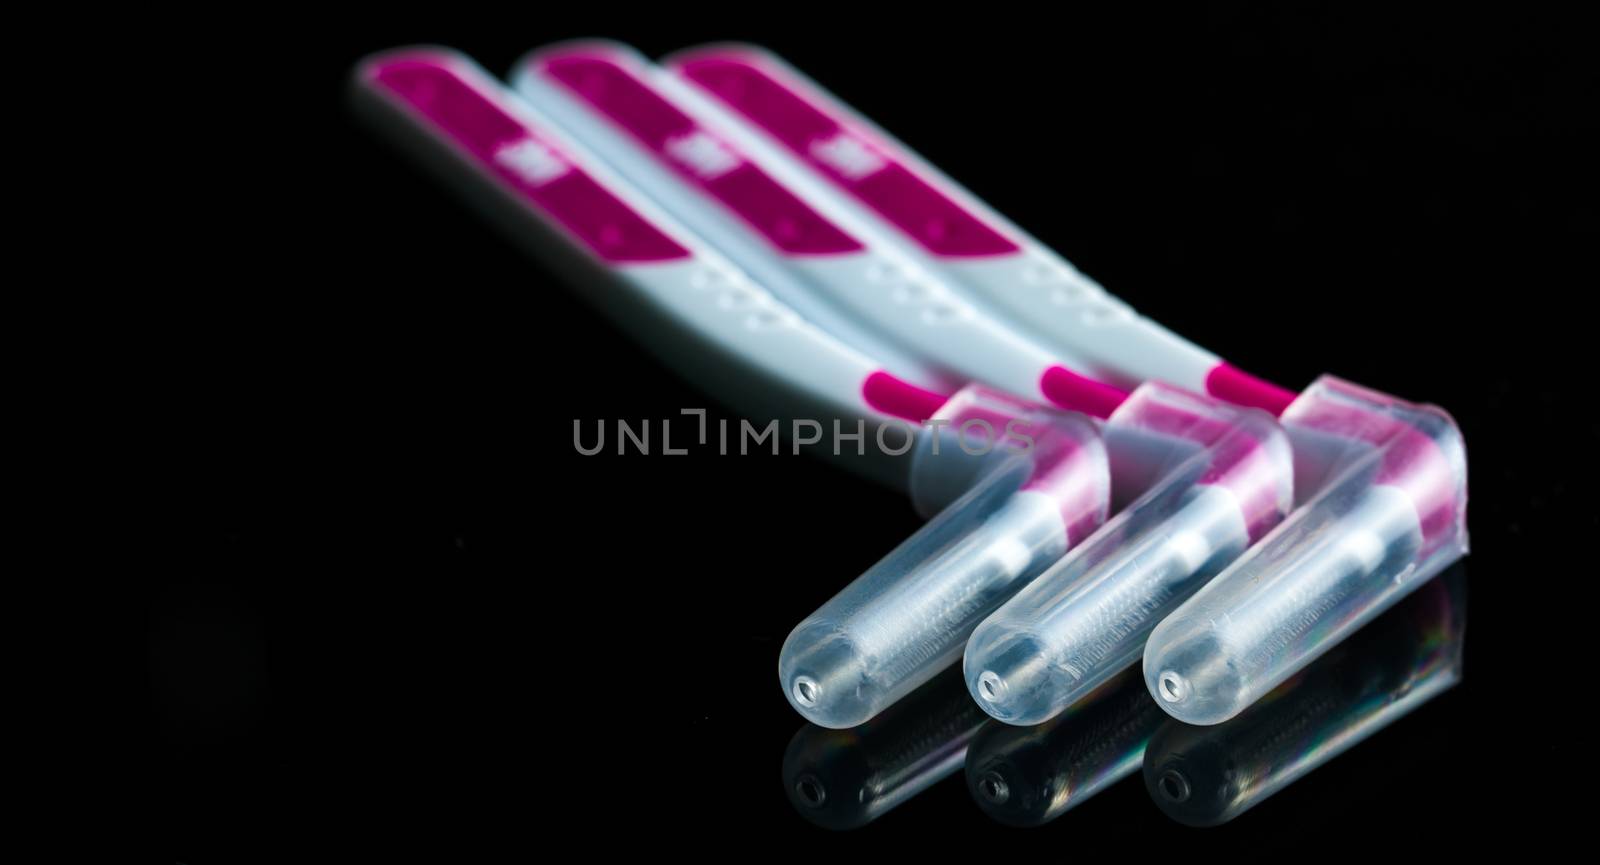 Three interdental brush with cover isolated on dark background with copy space. Dental care concept. Equipment for get rid of food stuck in teeth by Fahroni